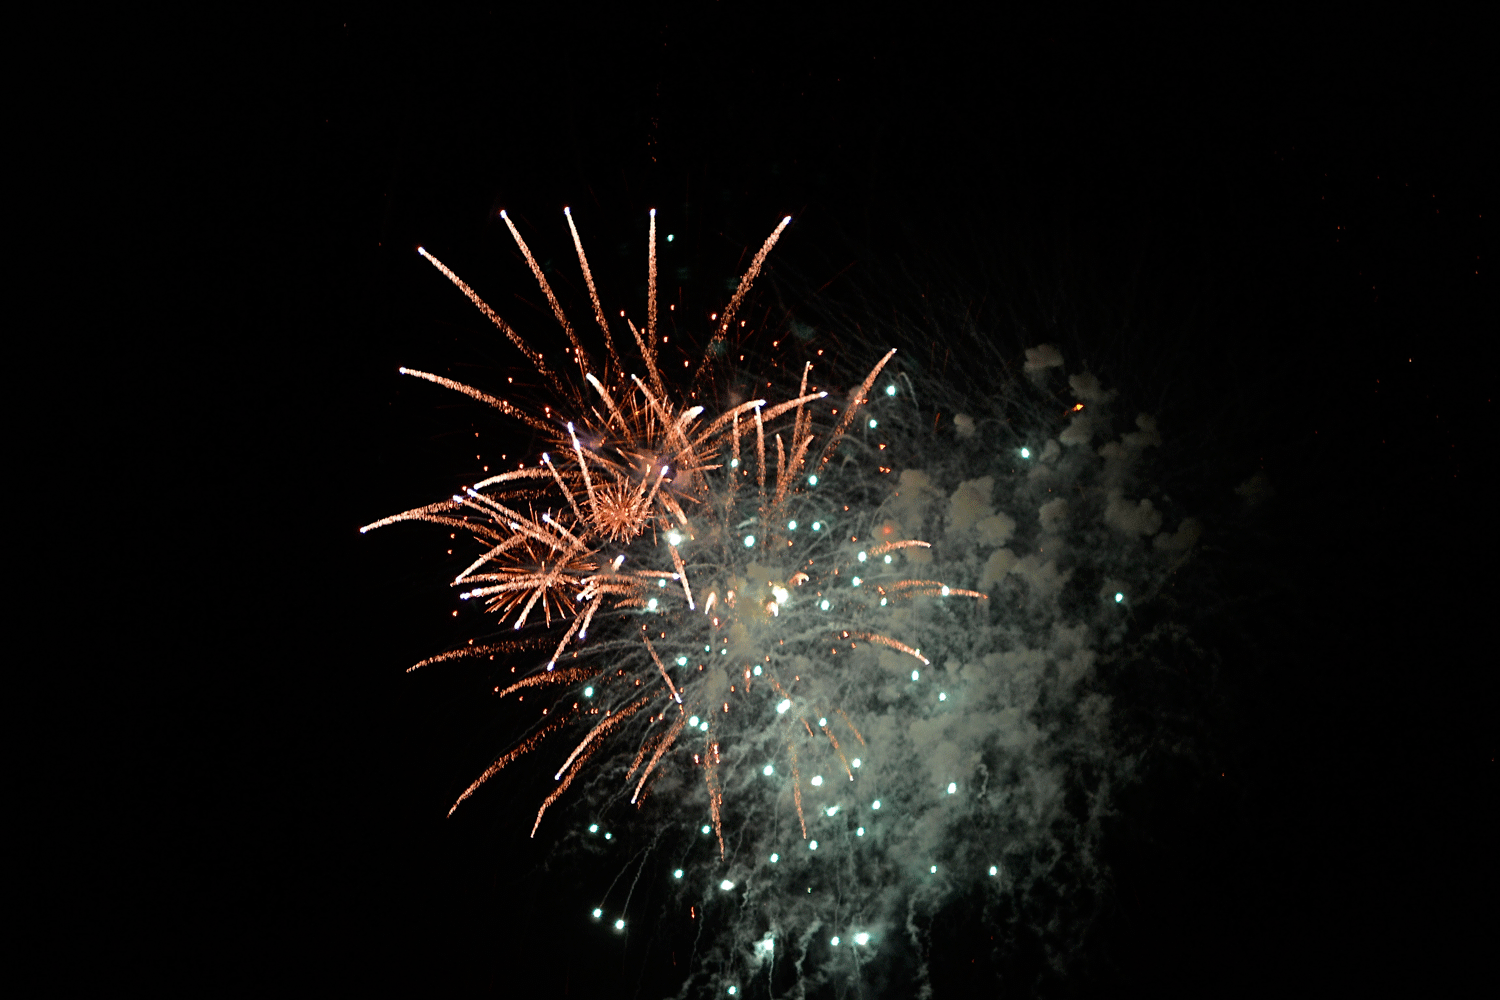 Gloucester Fireworks, July 4th 2012